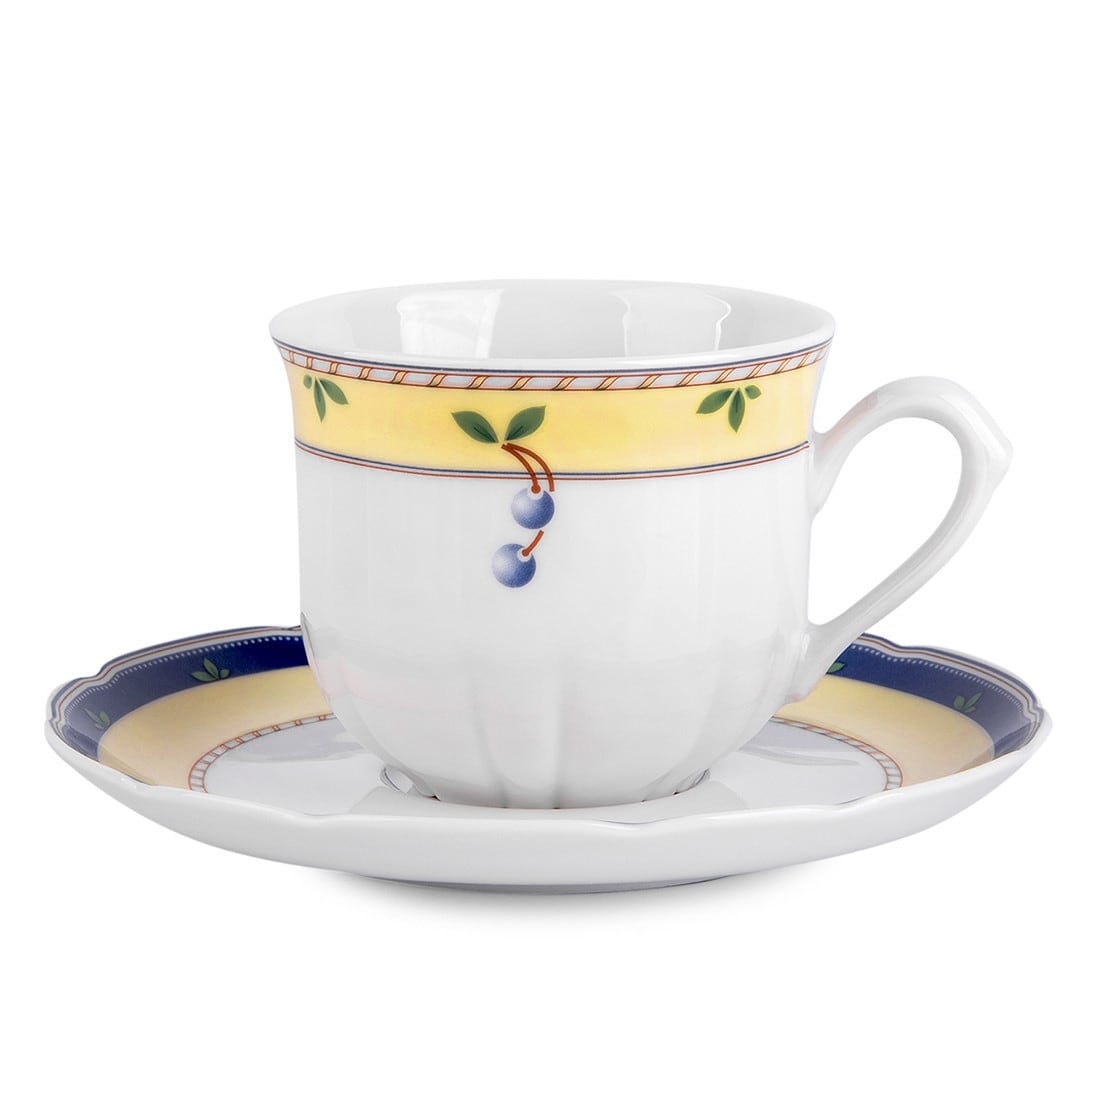 https://ak1.ostkcdn.com/images/products/is/images/direct/a86f30d0ccd5040cf83c5a56b5d602816a79ba92/Blueberry-Porcelain-Tea-Coffee-Cup-and-Saucer-Set.jpg